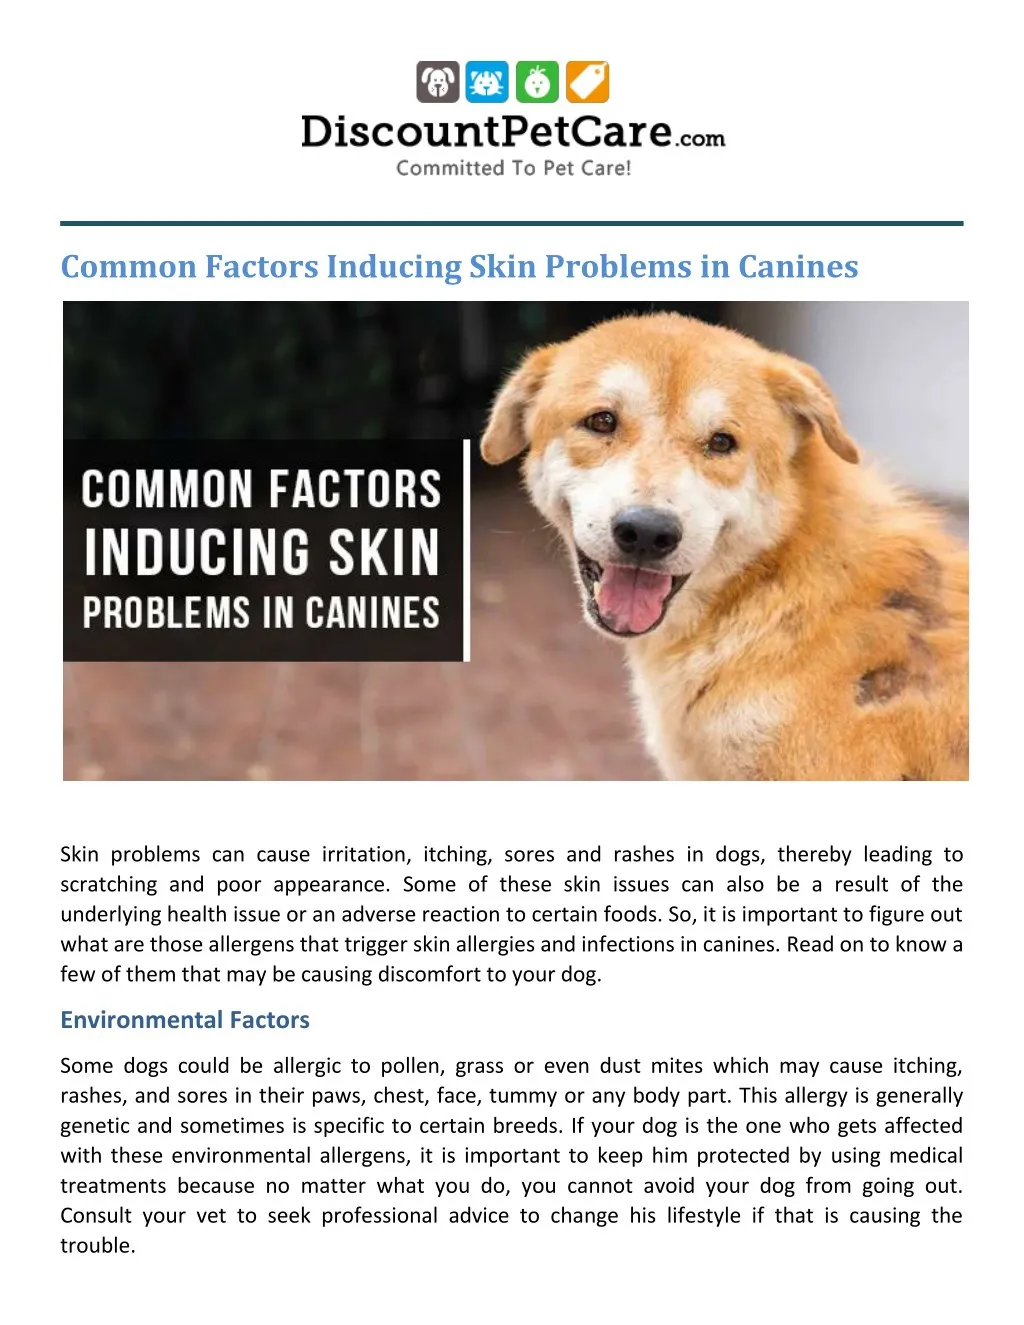 common factors inducing skin problems in canines